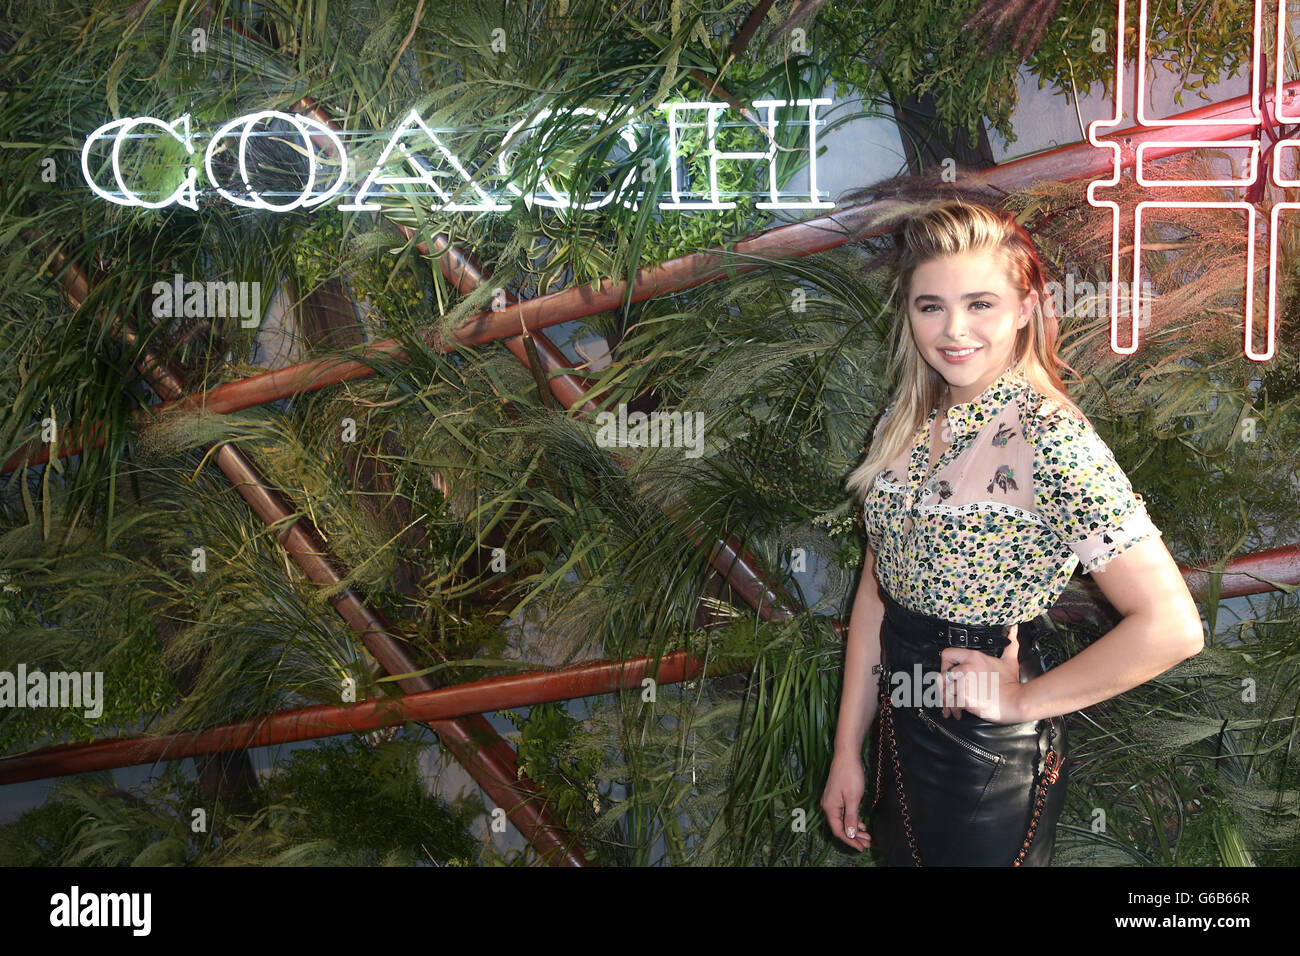 New York, NY, USA. 22nd June, 2023. Chloe Grace Moretz at NBC's Today Show  in New York City on June 22, 2023. Credit: Rw/Media Punch/Alamy Live News  Stock Photo - Alamy